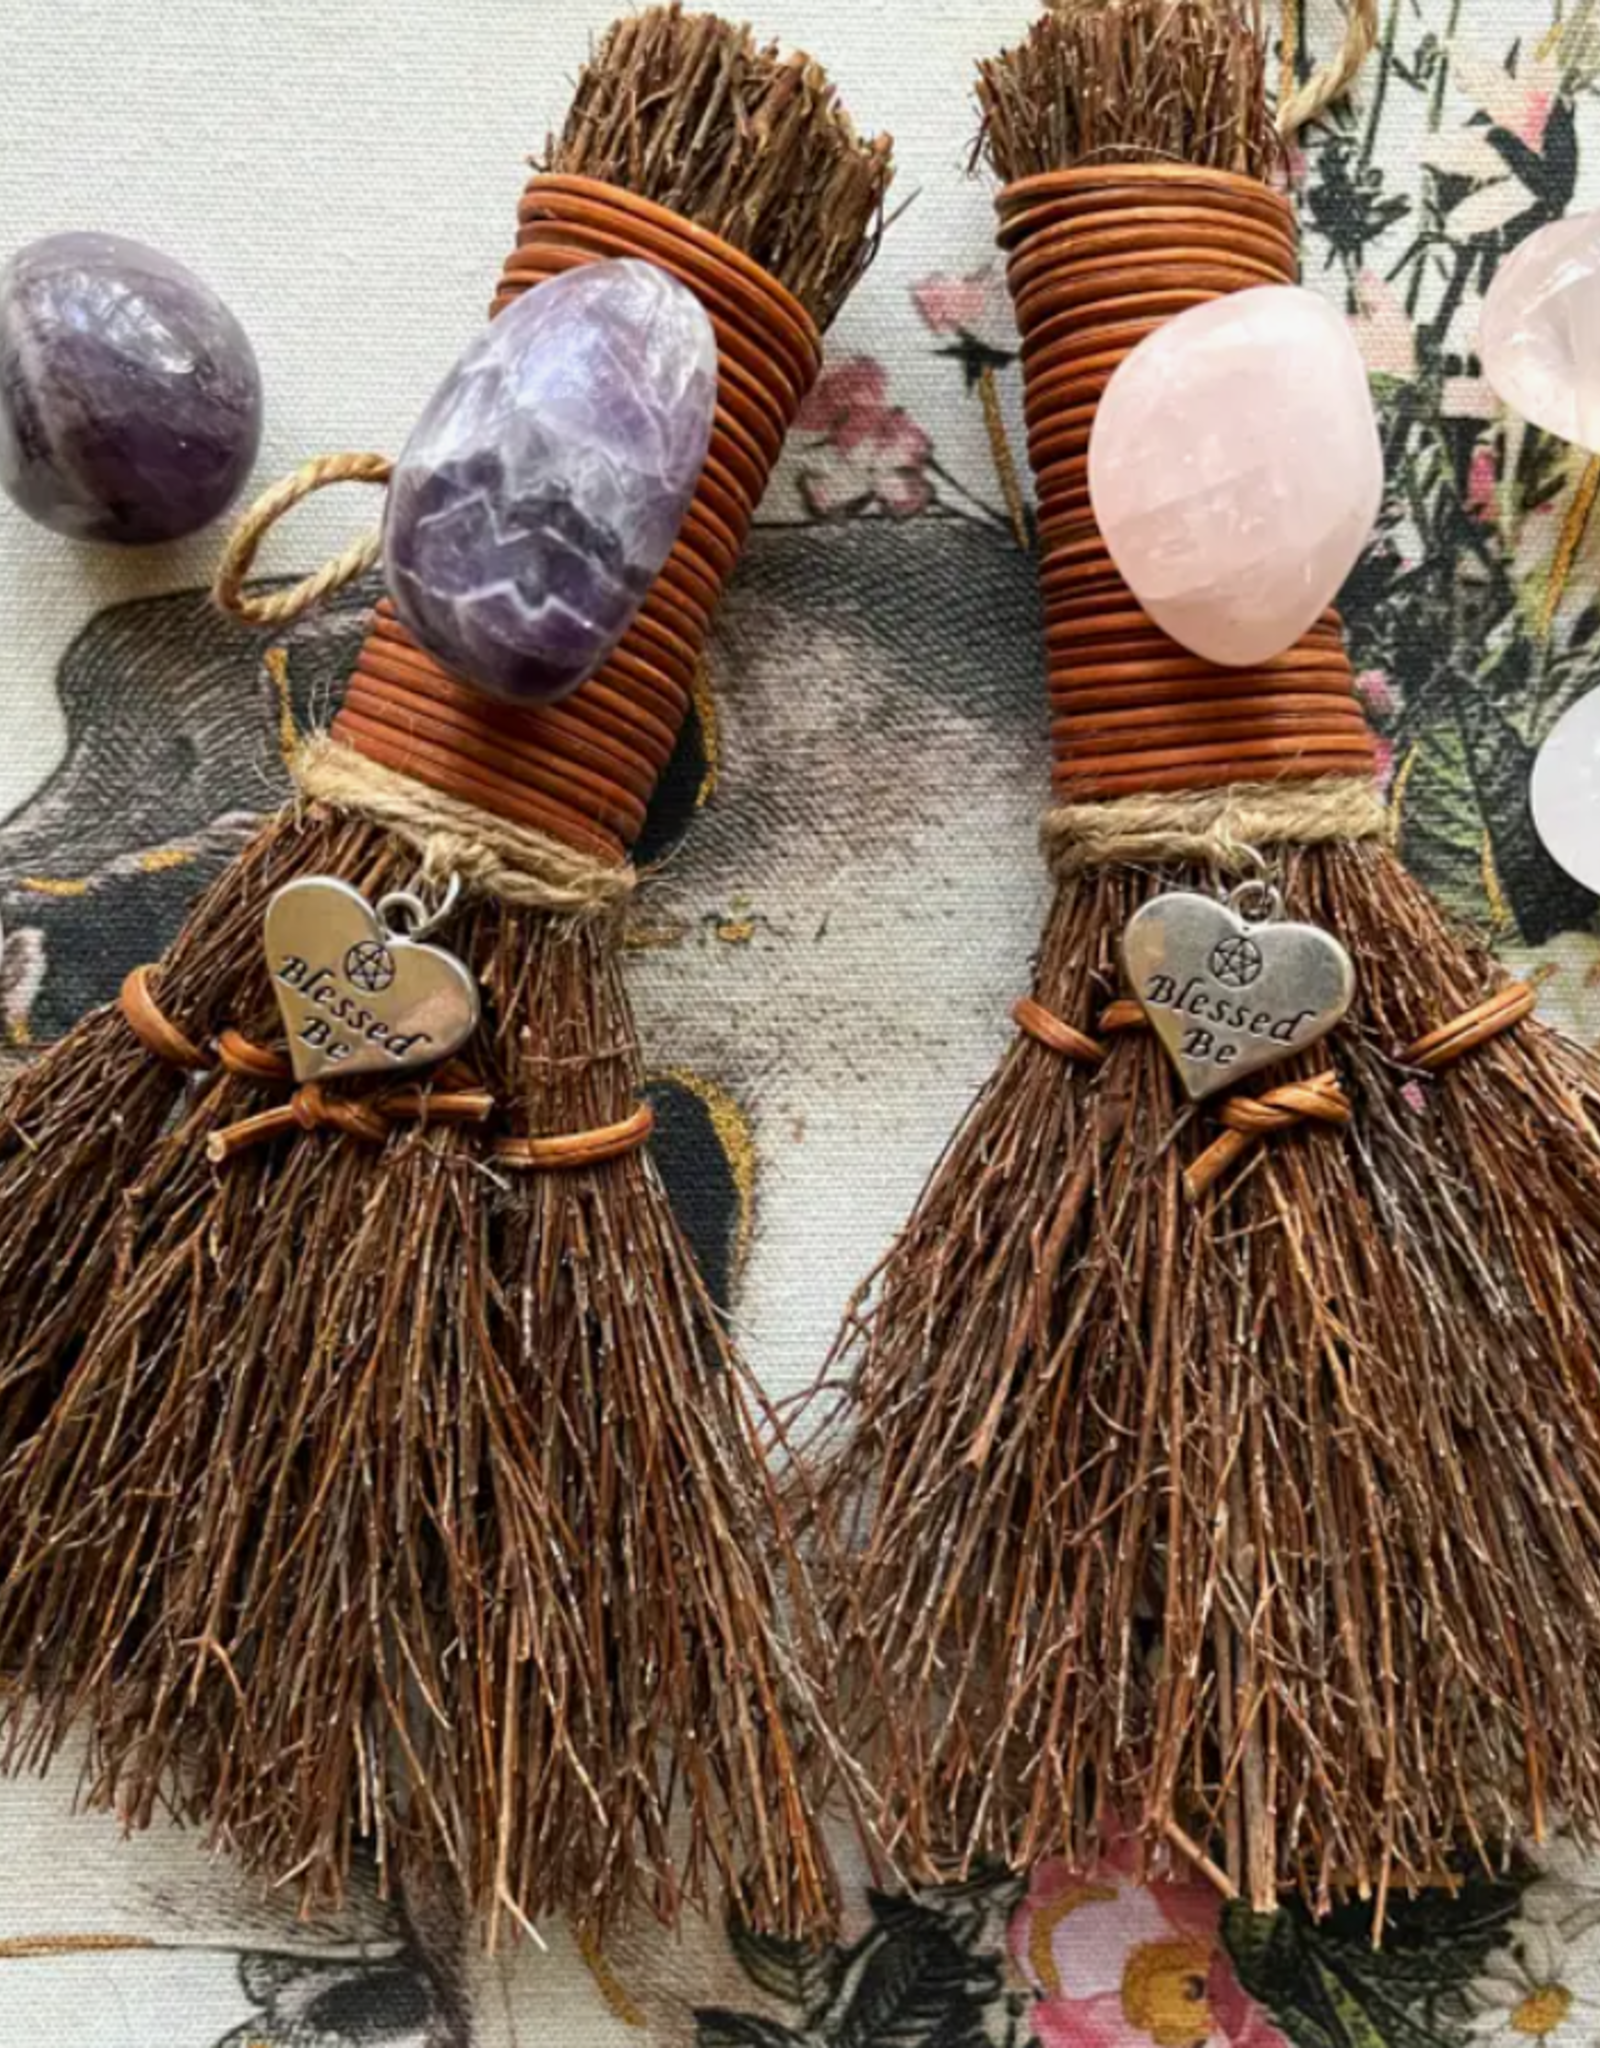 https://cdn.shoplightspeed.com/shops/626075/files/55717558/1600x2048x1/blessed-be-witchs-besom-witch-broom-w-crystal-rose.jpg